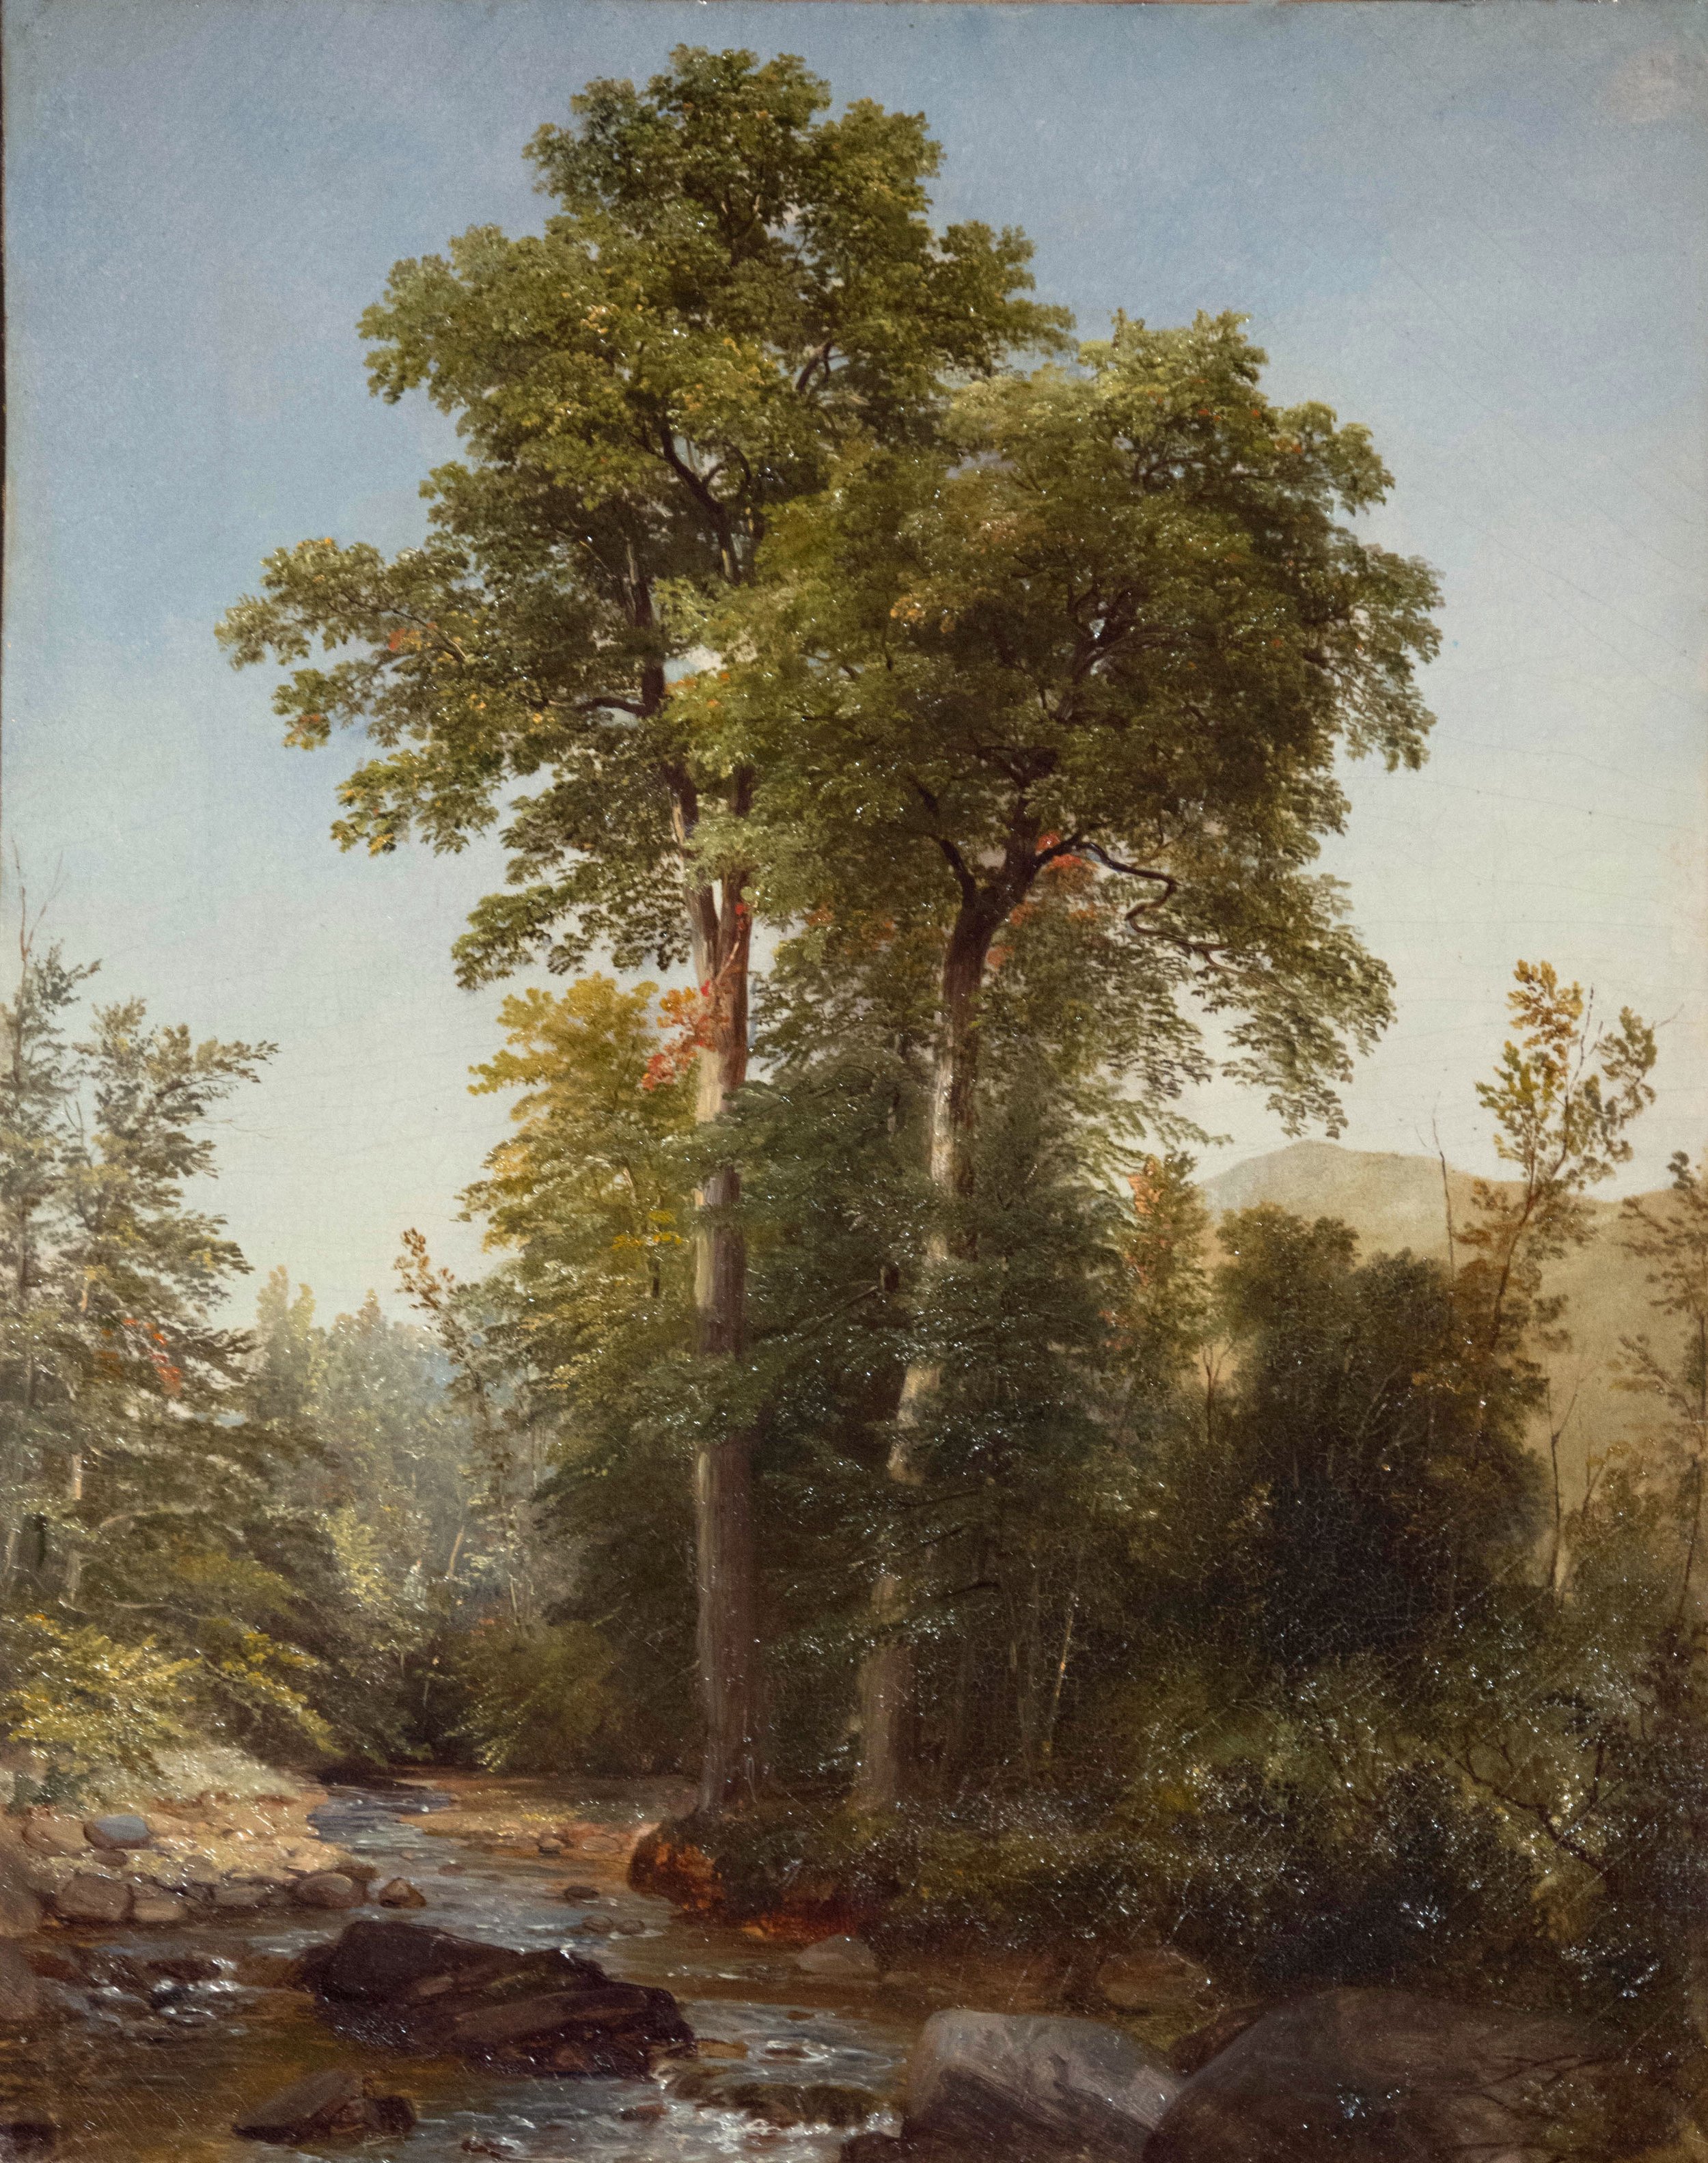   Asher Brown Durand  United States, 1796–1886  Untitled Landscape , 1853 oil on canvas, 21 x 17 inches Gift of Hannah Woodman, 1962.6   